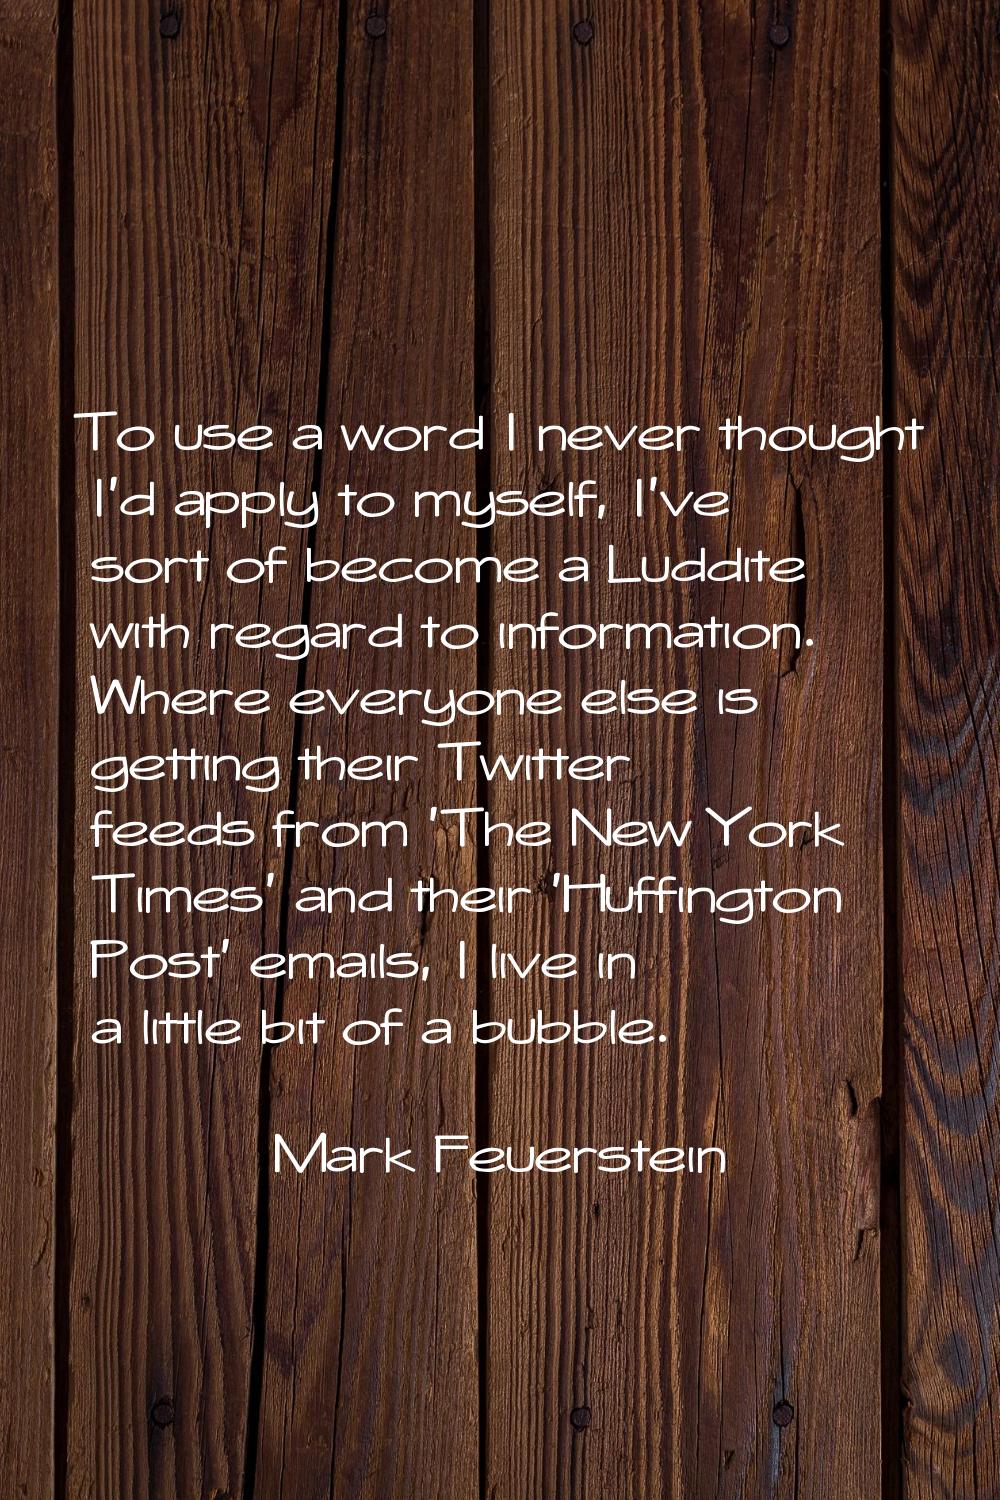 To use a word I never thought I'd apply to myself, I've sort of become a Luddite with regard to inf